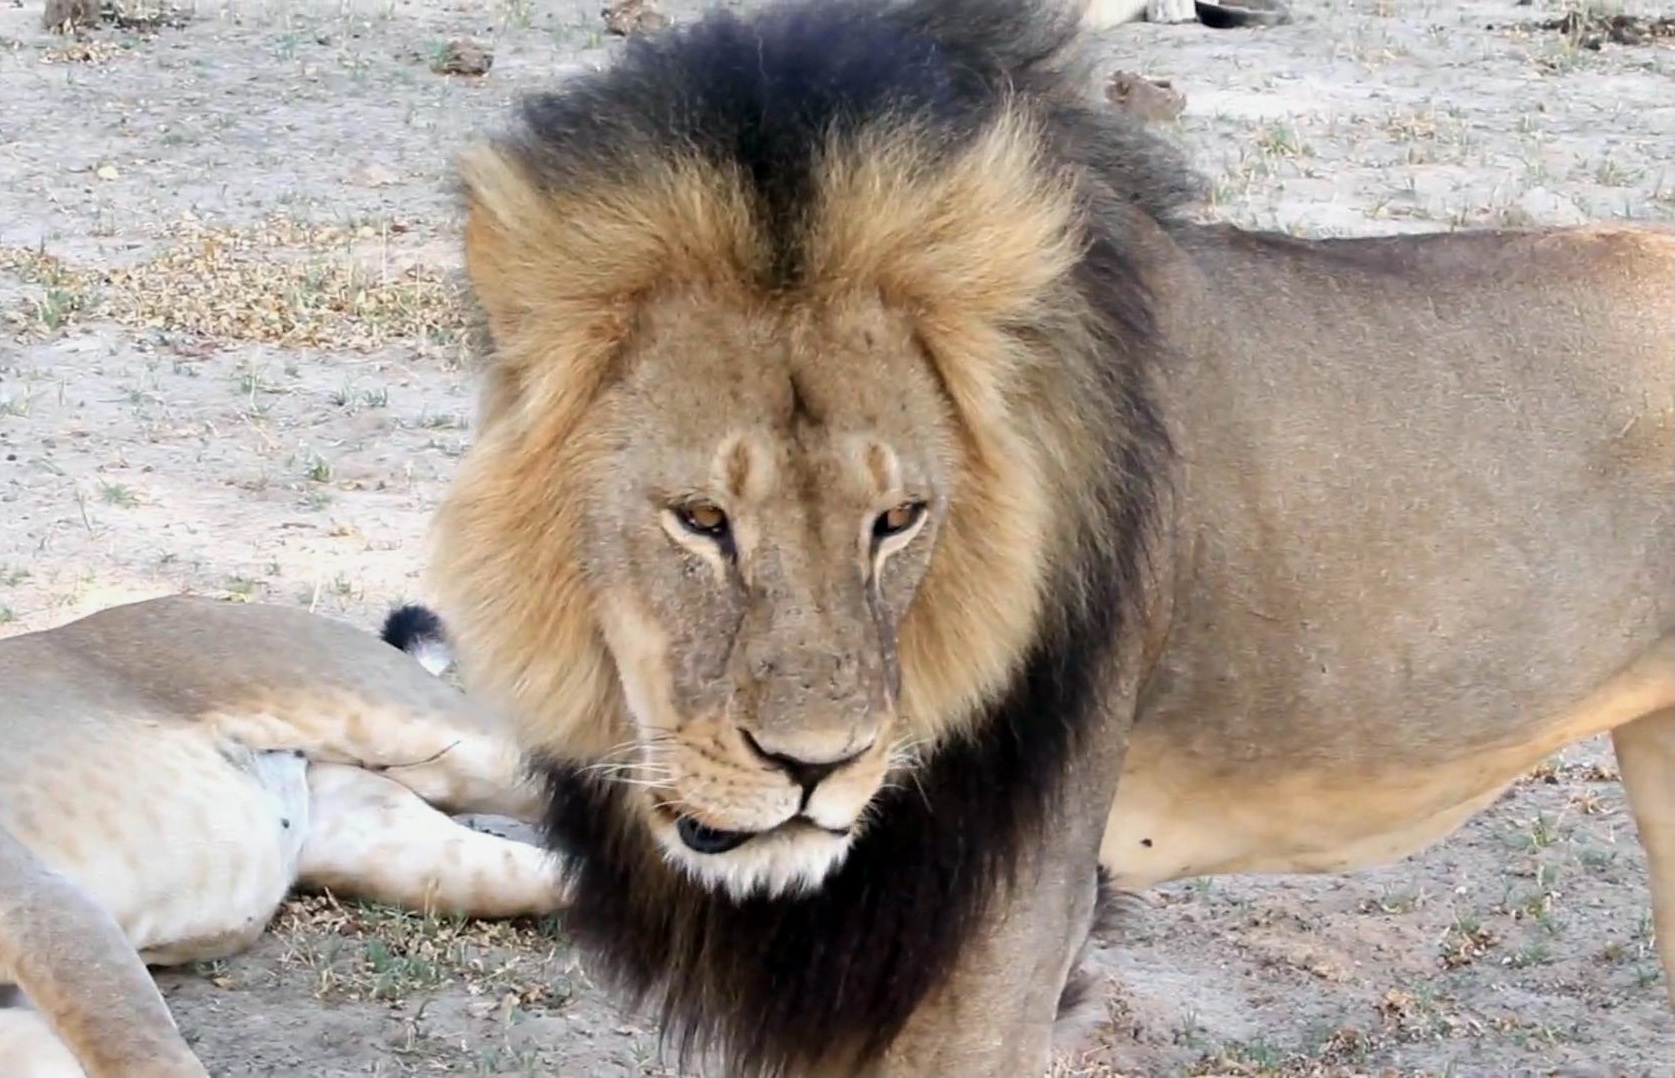 PHOTO: A well-known, protected lion known as Cecil strolls around in Hwange National Park, in Hwange, Zimbabwe in this November 2012 file photo.